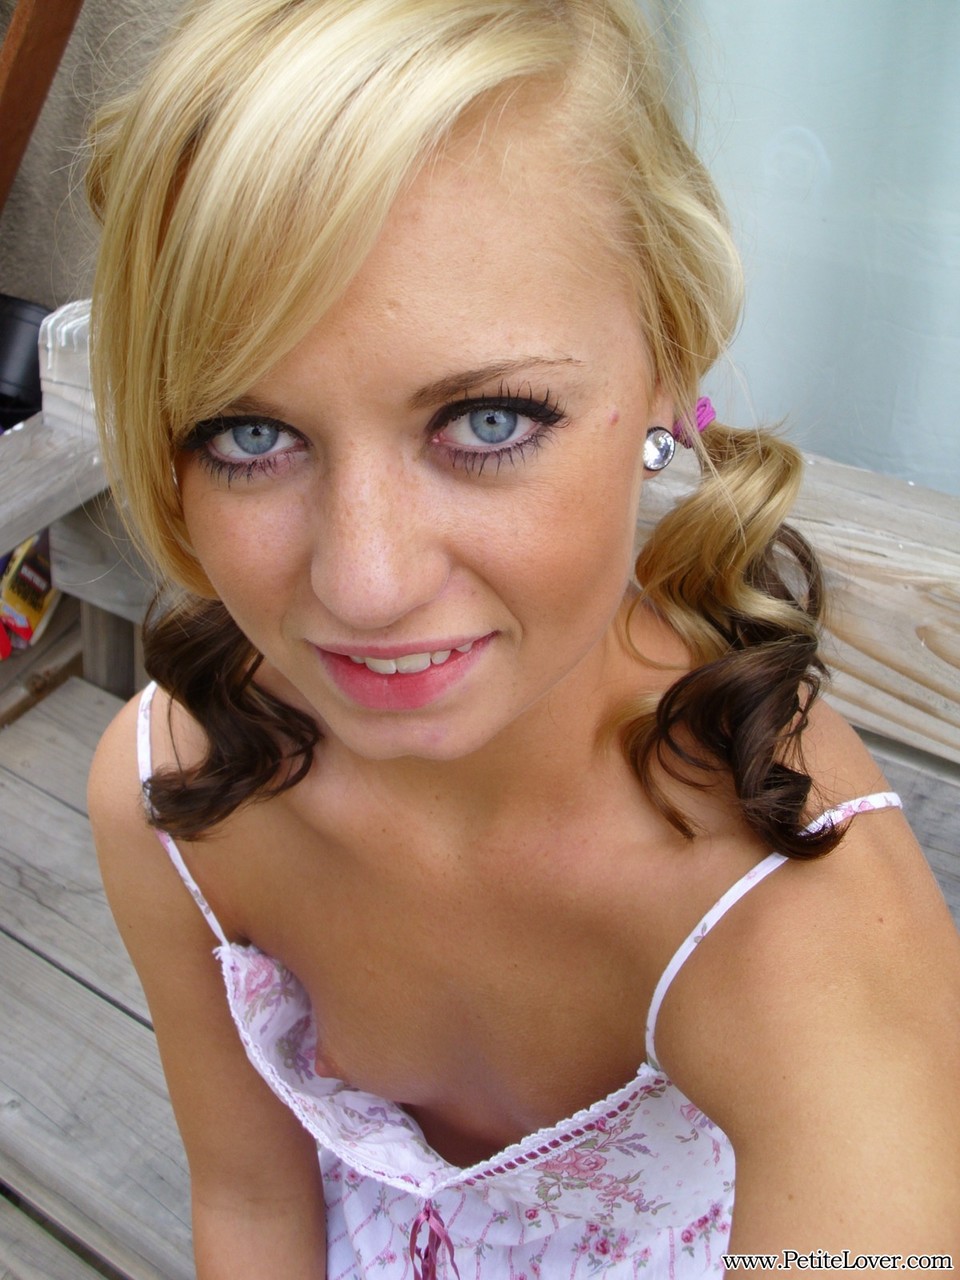 Cute blonde Tiff in pigtails showing off her wee small tits & tiny bald pussy porno foto #428478636 | Petite Lover Pics, Tiff, Amateur, mobiele porno